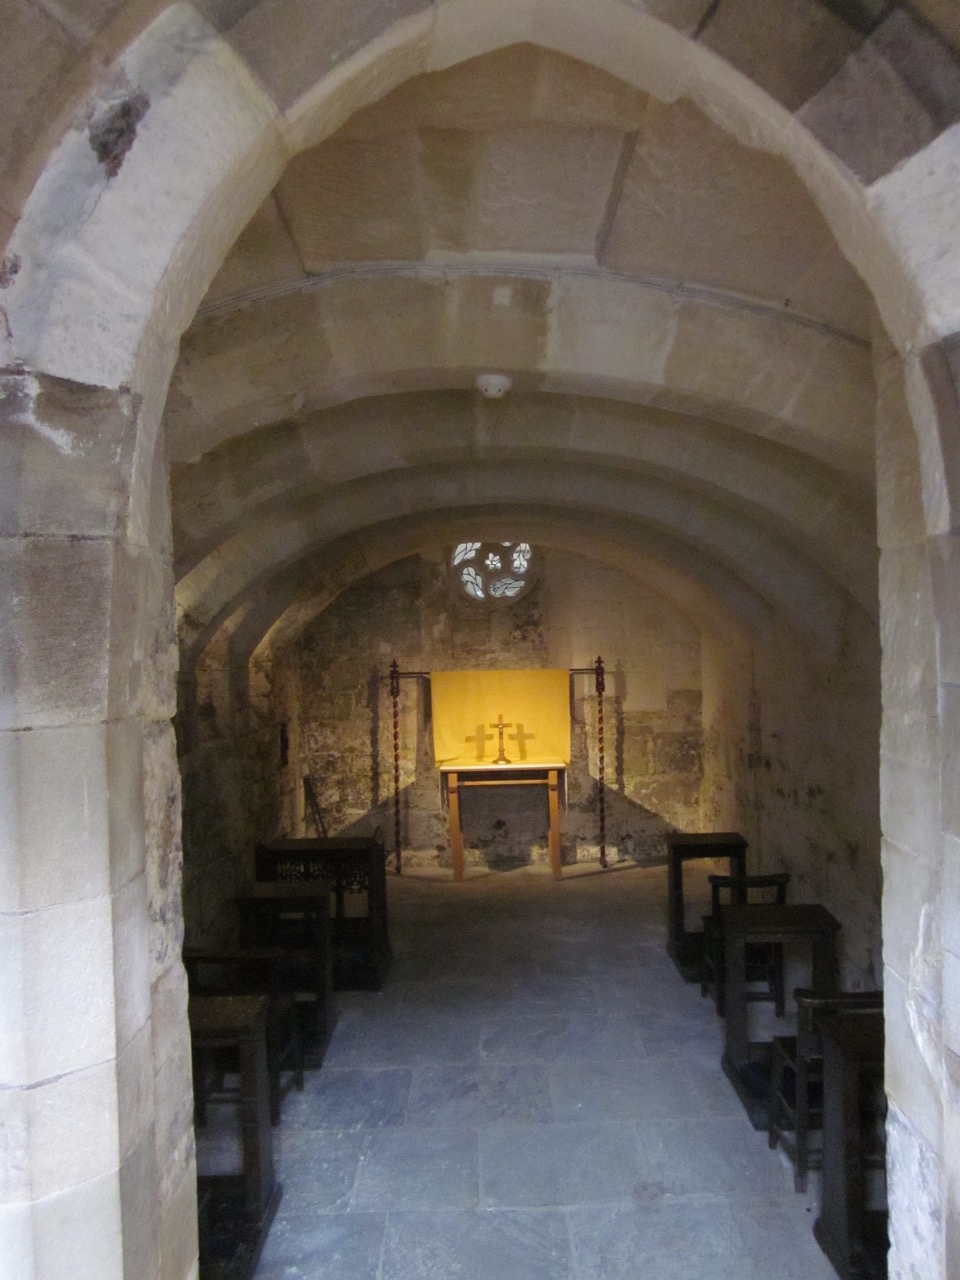 Descent into the crypt